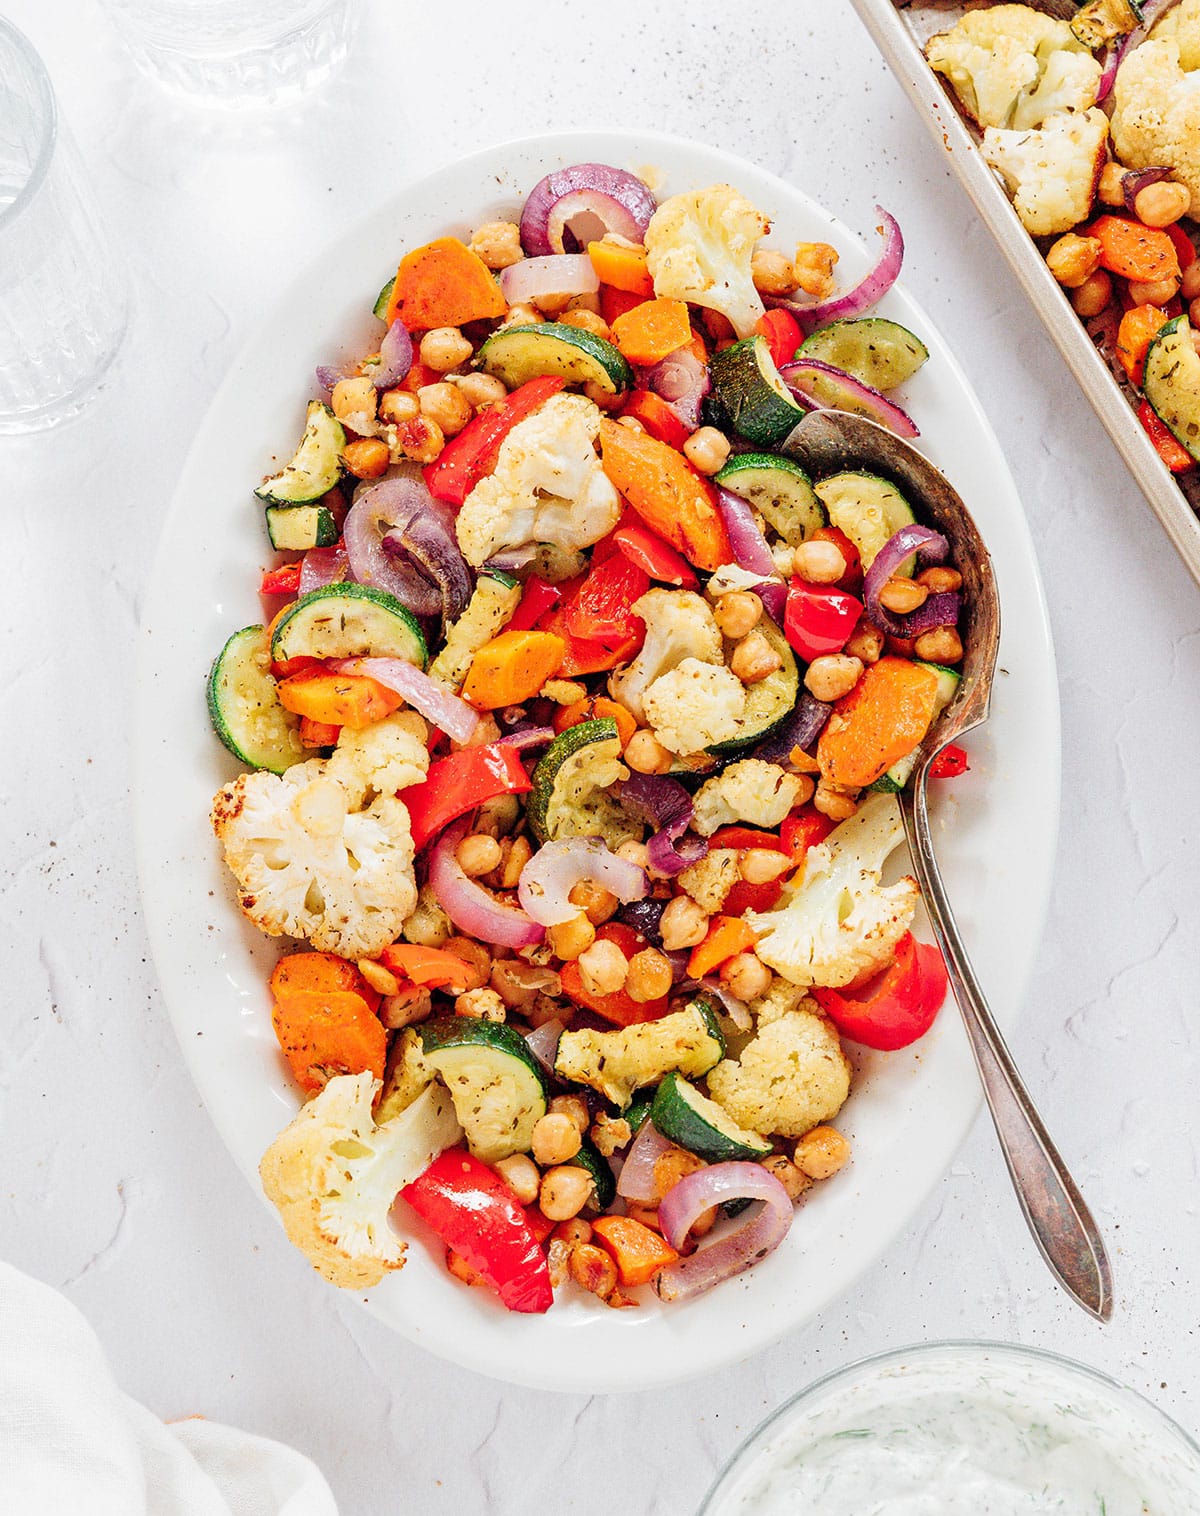 A serving bowl of roasted Mediterranean veggies including cauliflower and zucchini.